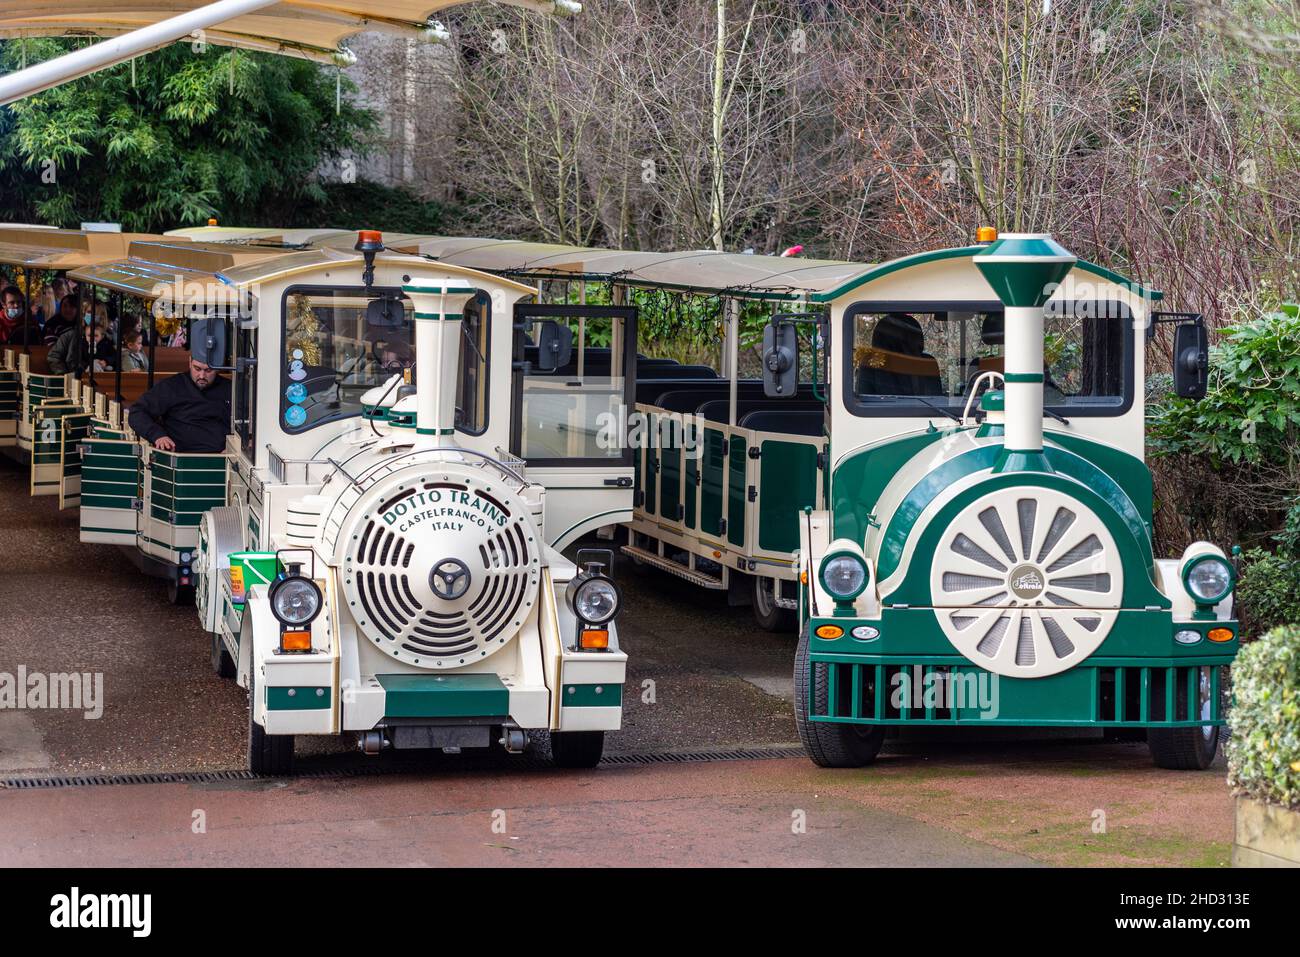 Lost Madagascar Express trains in 'station' at Colchester Zoo, Essex, UK. Transport experience for zoo visiting public. Built by Dotto Trains, Italy Stock Photo